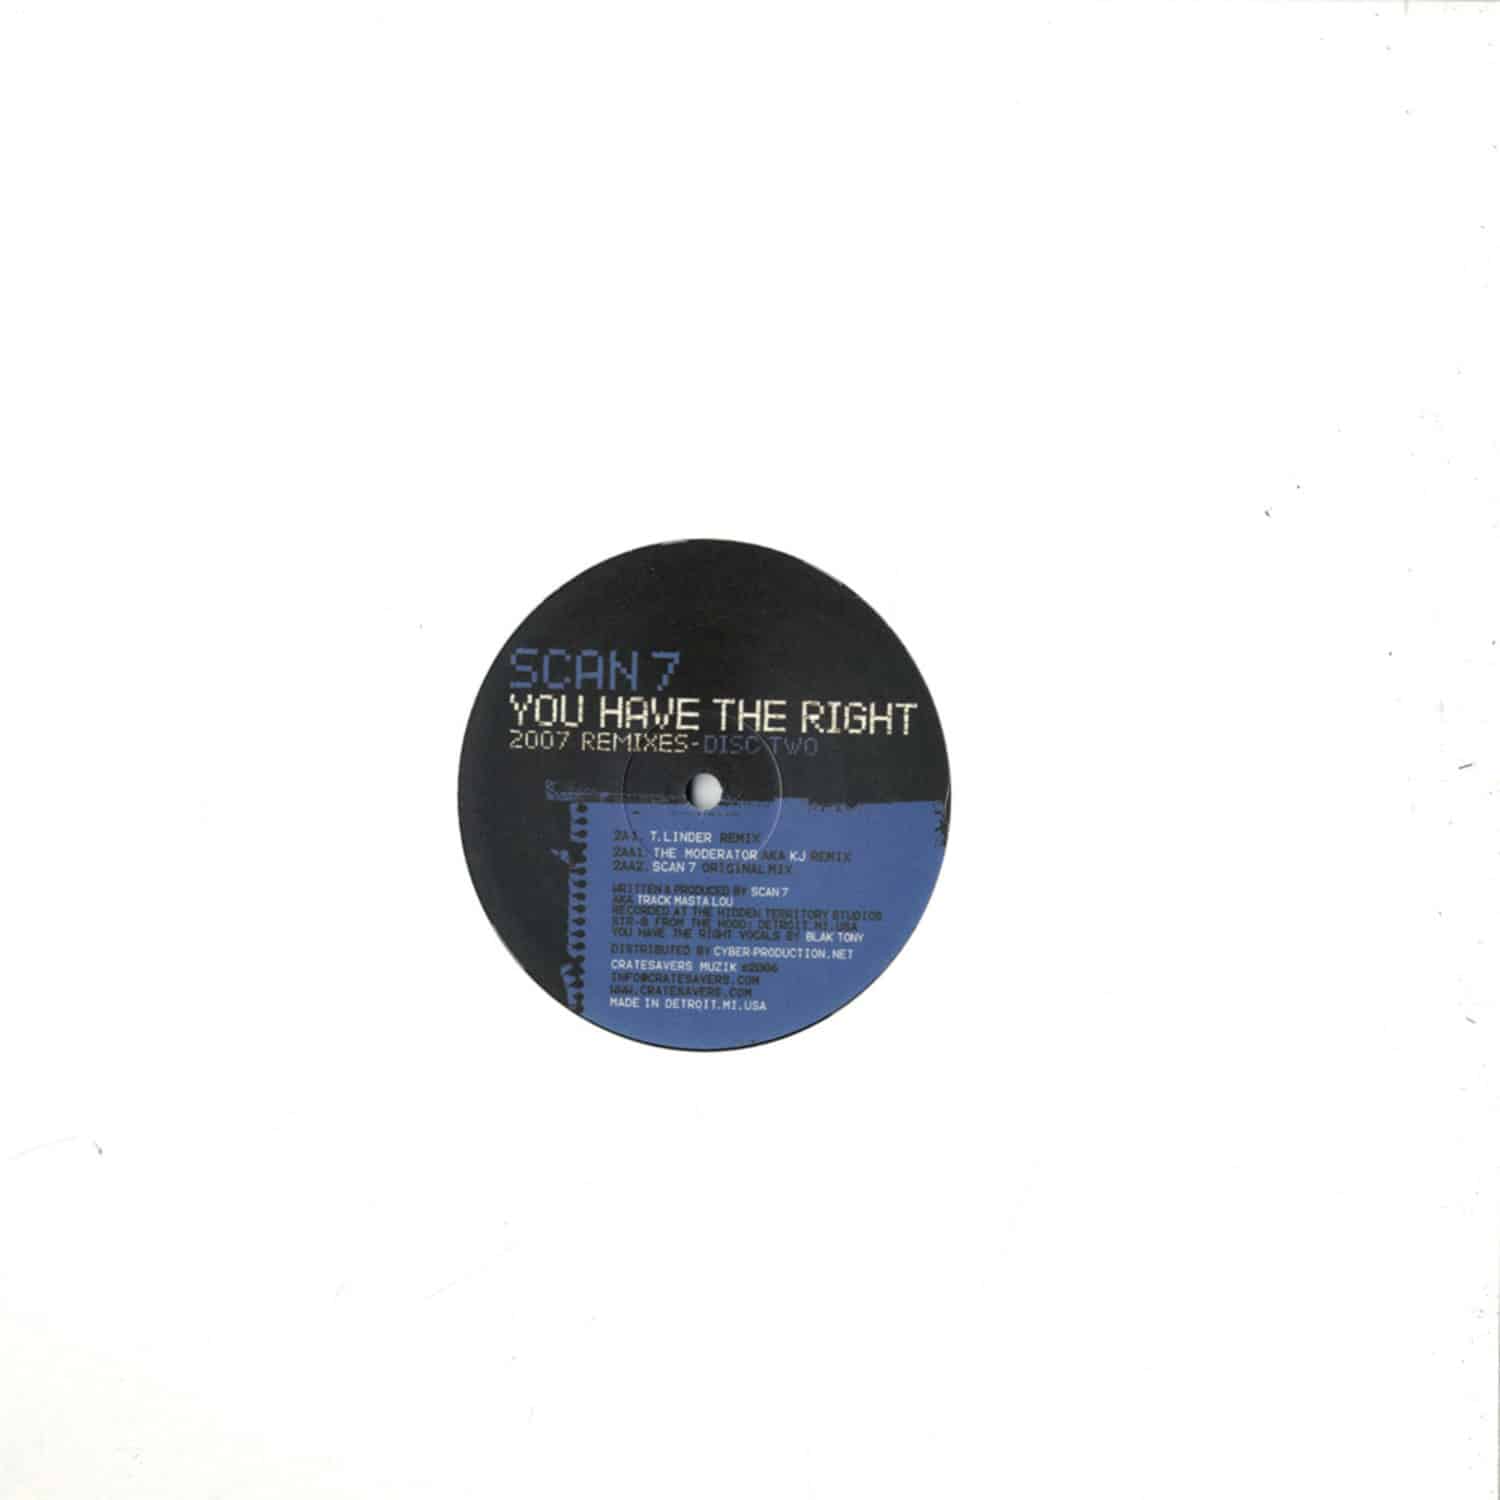 Scan 7 - YOU HAVE THE RIGHT - 2007 REMIXES - DISC 2